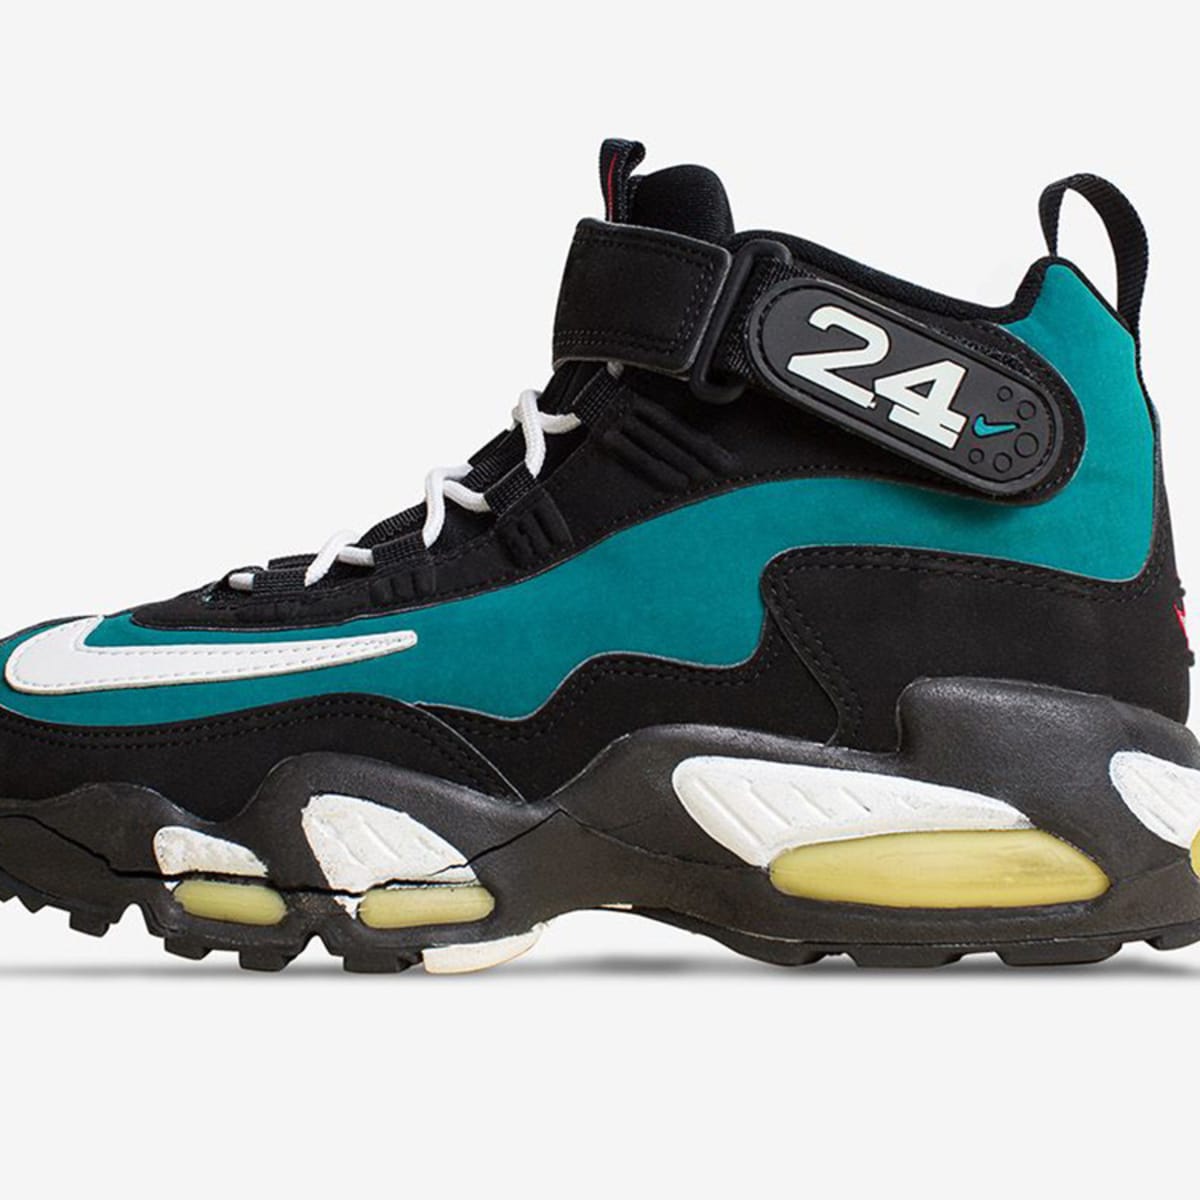 Ken Griffey Jr.'s sneakers inspired a - Sports Illustrated